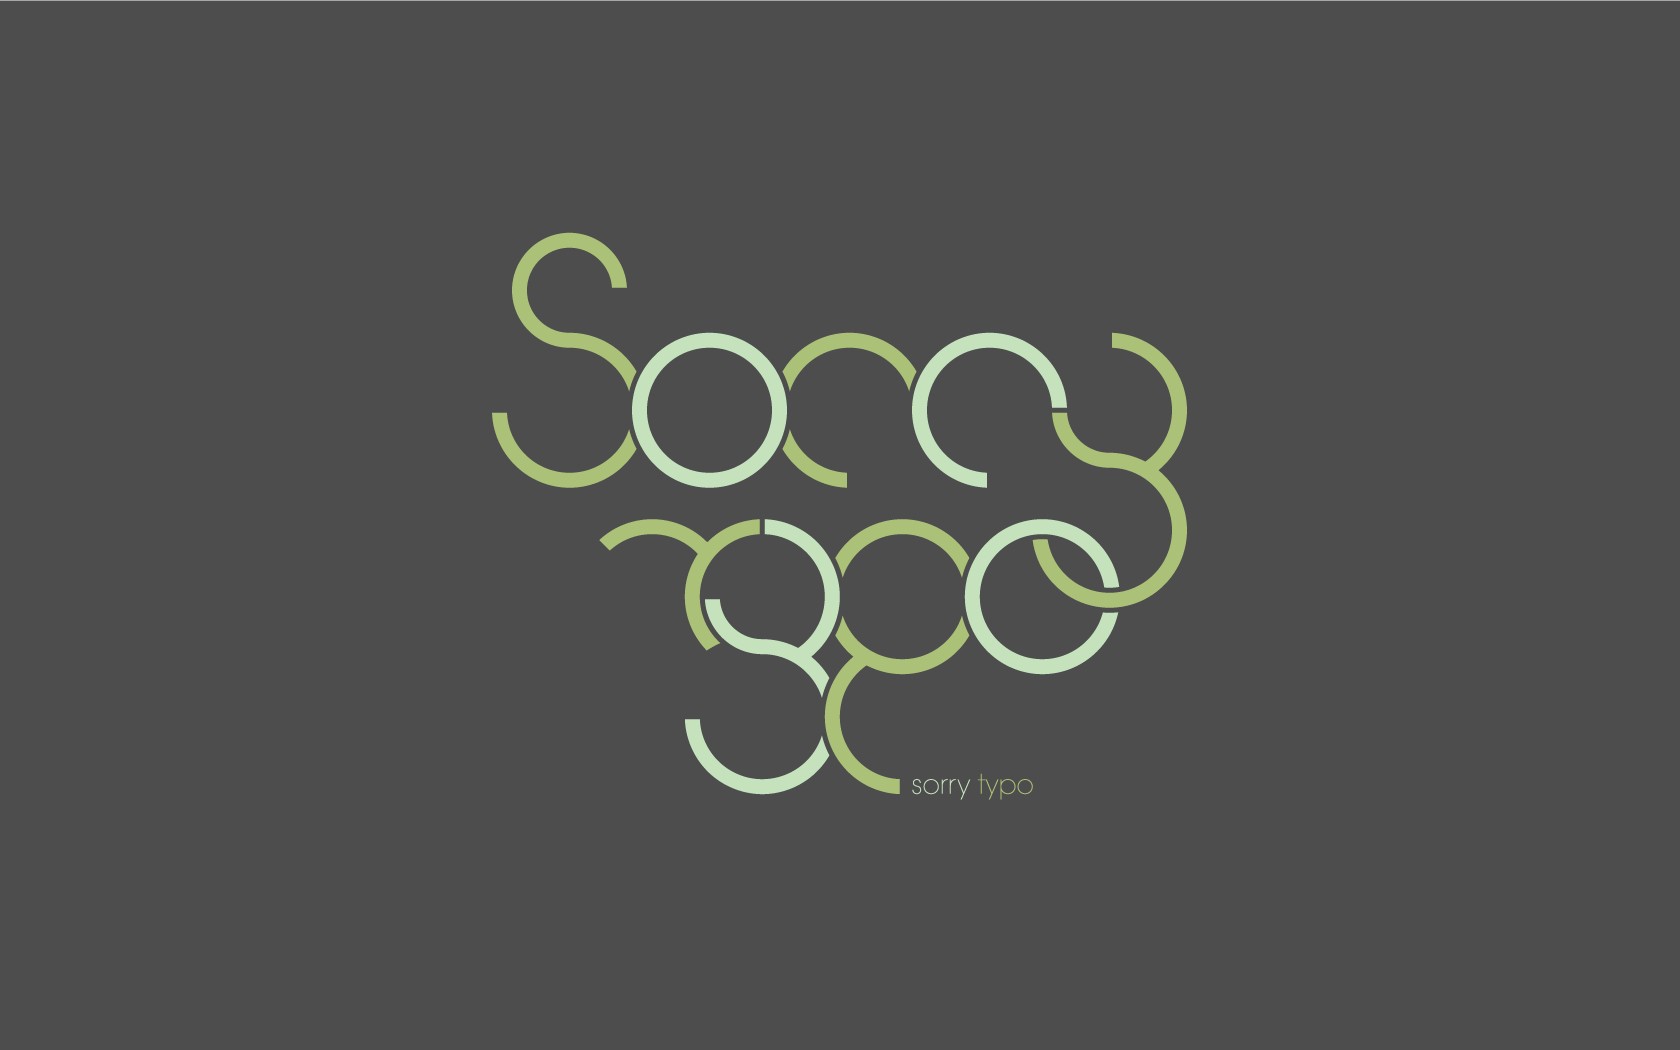 Sorry Typography Google Themes Wallpaper